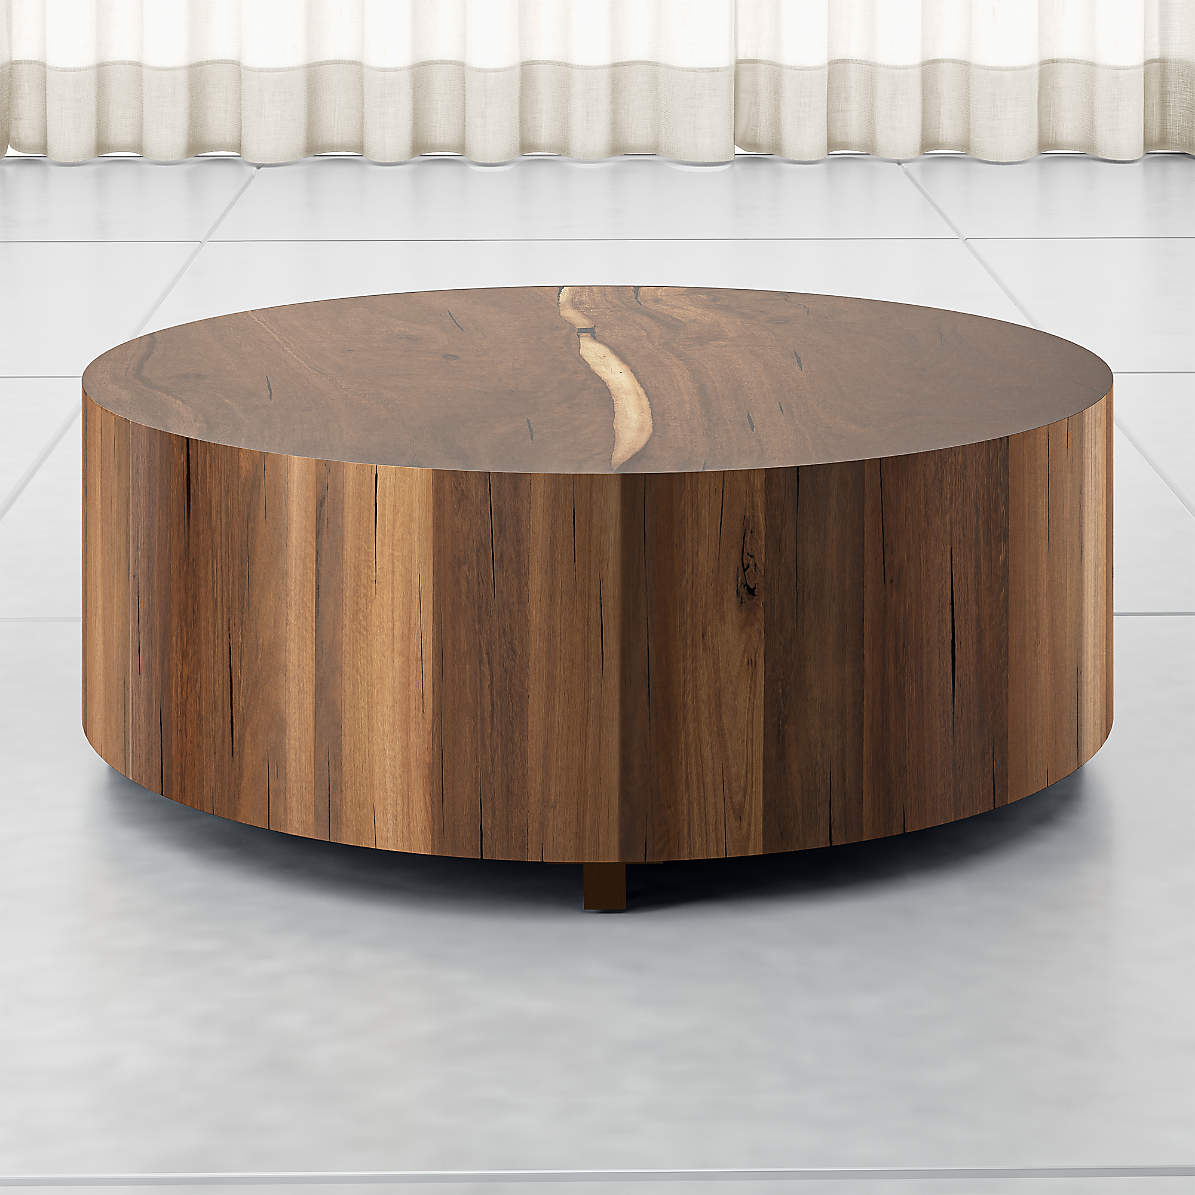 Dillon Natural Yukas Round Wood Coffee Table Reviews Crate And Barrel